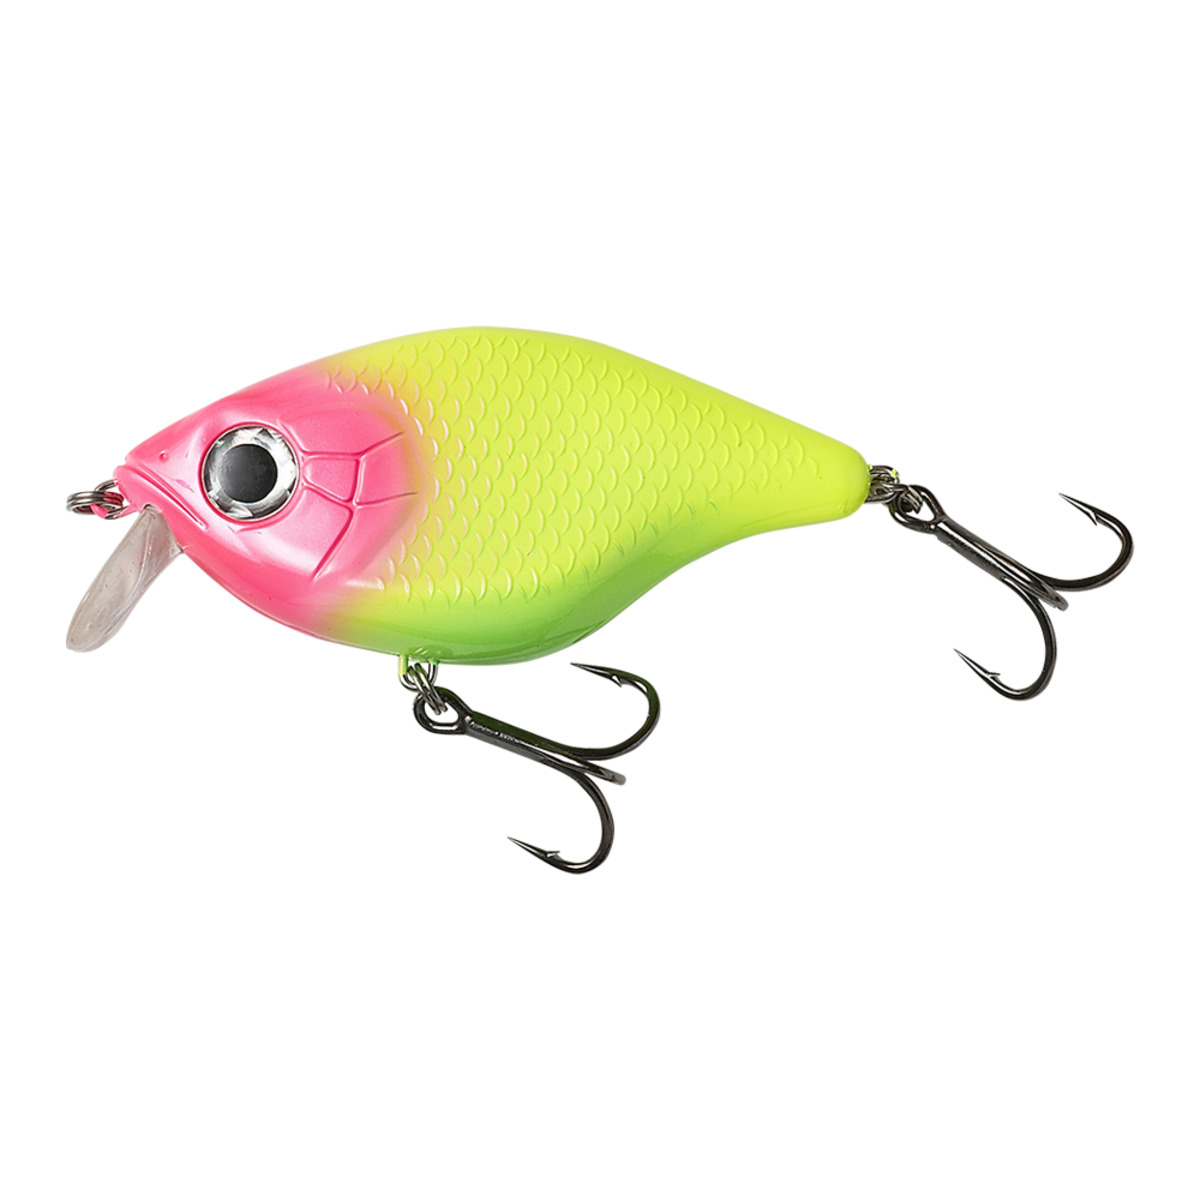 Madcat Tight-s Shallow 12cm 65g Floating - CANDY